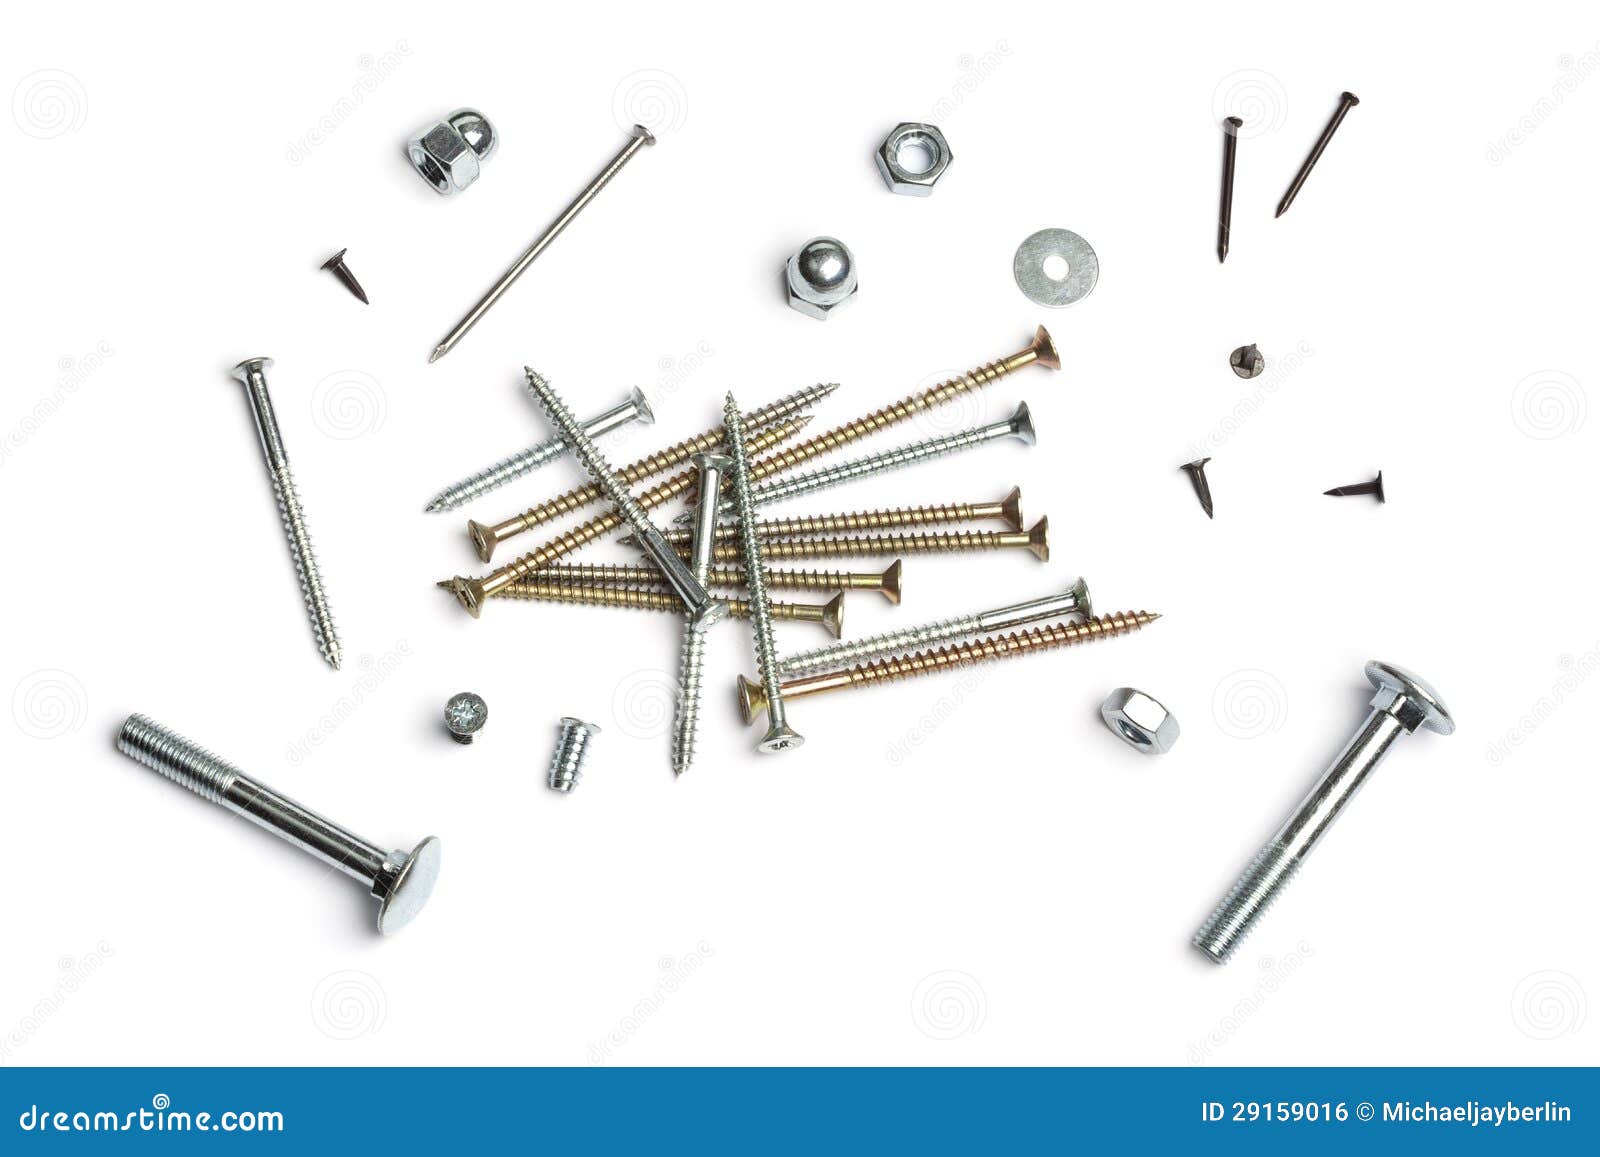 Screws and nails stock photo. Image of gray, mechanic - 29278774